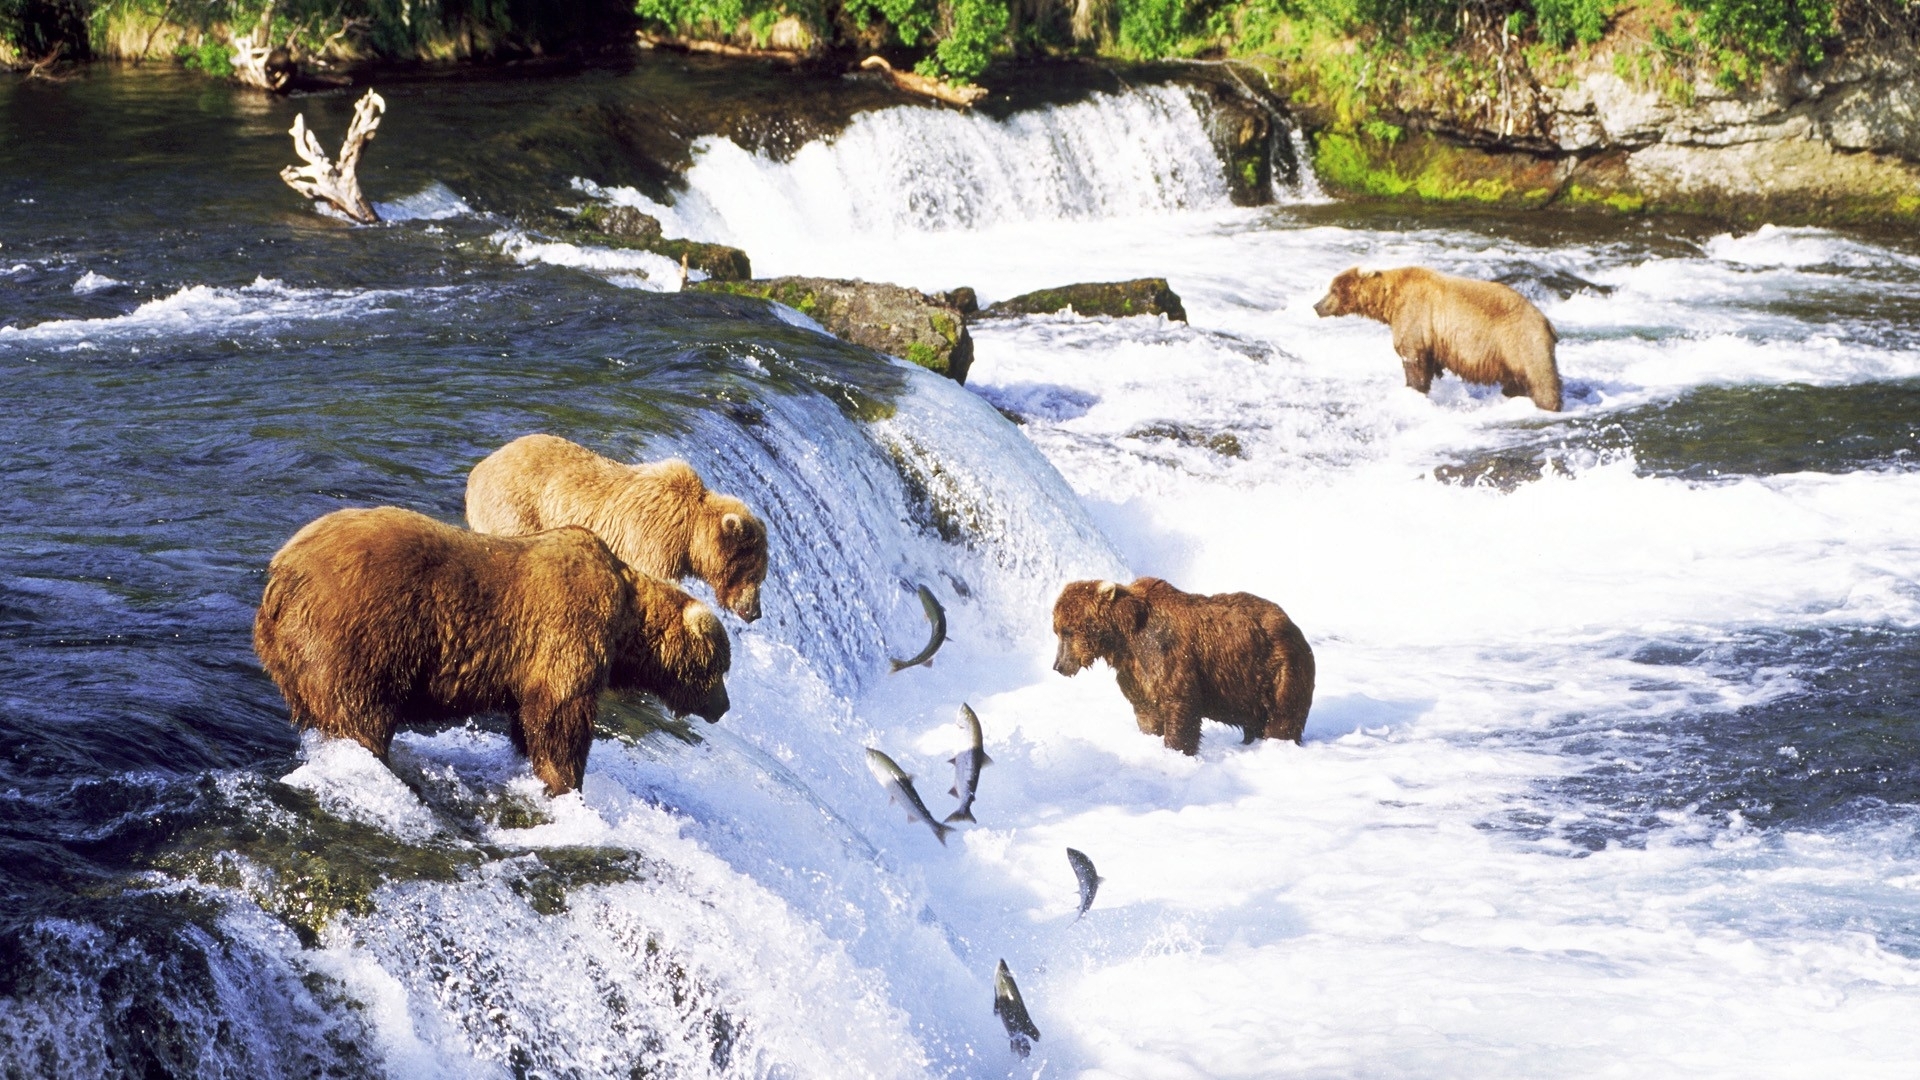 grizzly, Bears, Alaska, Fishes, Salmon, Rivers, Nature Wallpaper